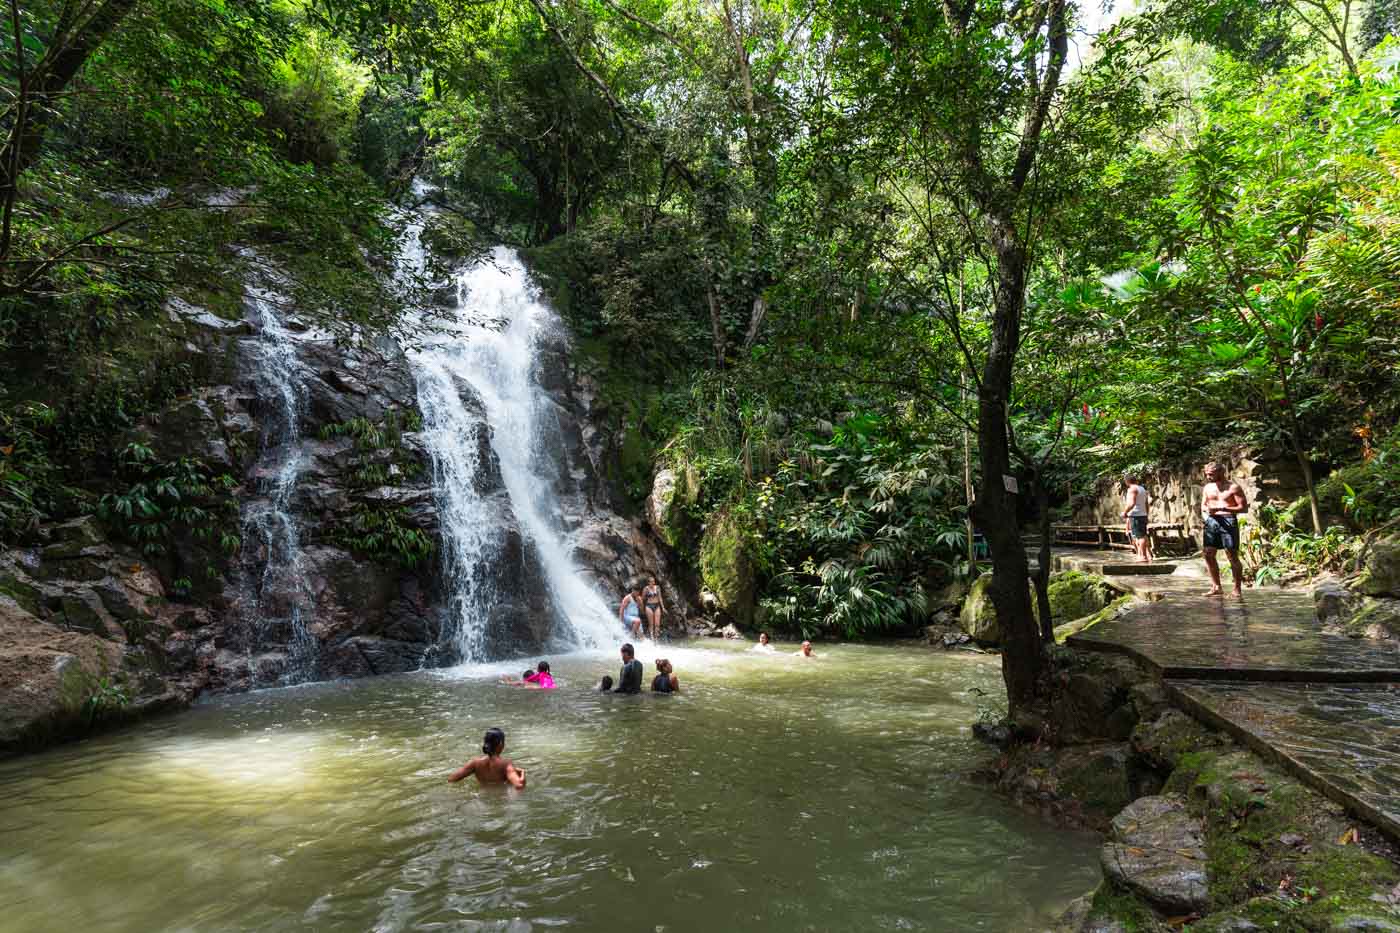 Tourists going about their day swimming in the plunge pool at the lower Marinka Waterfall in the forest.